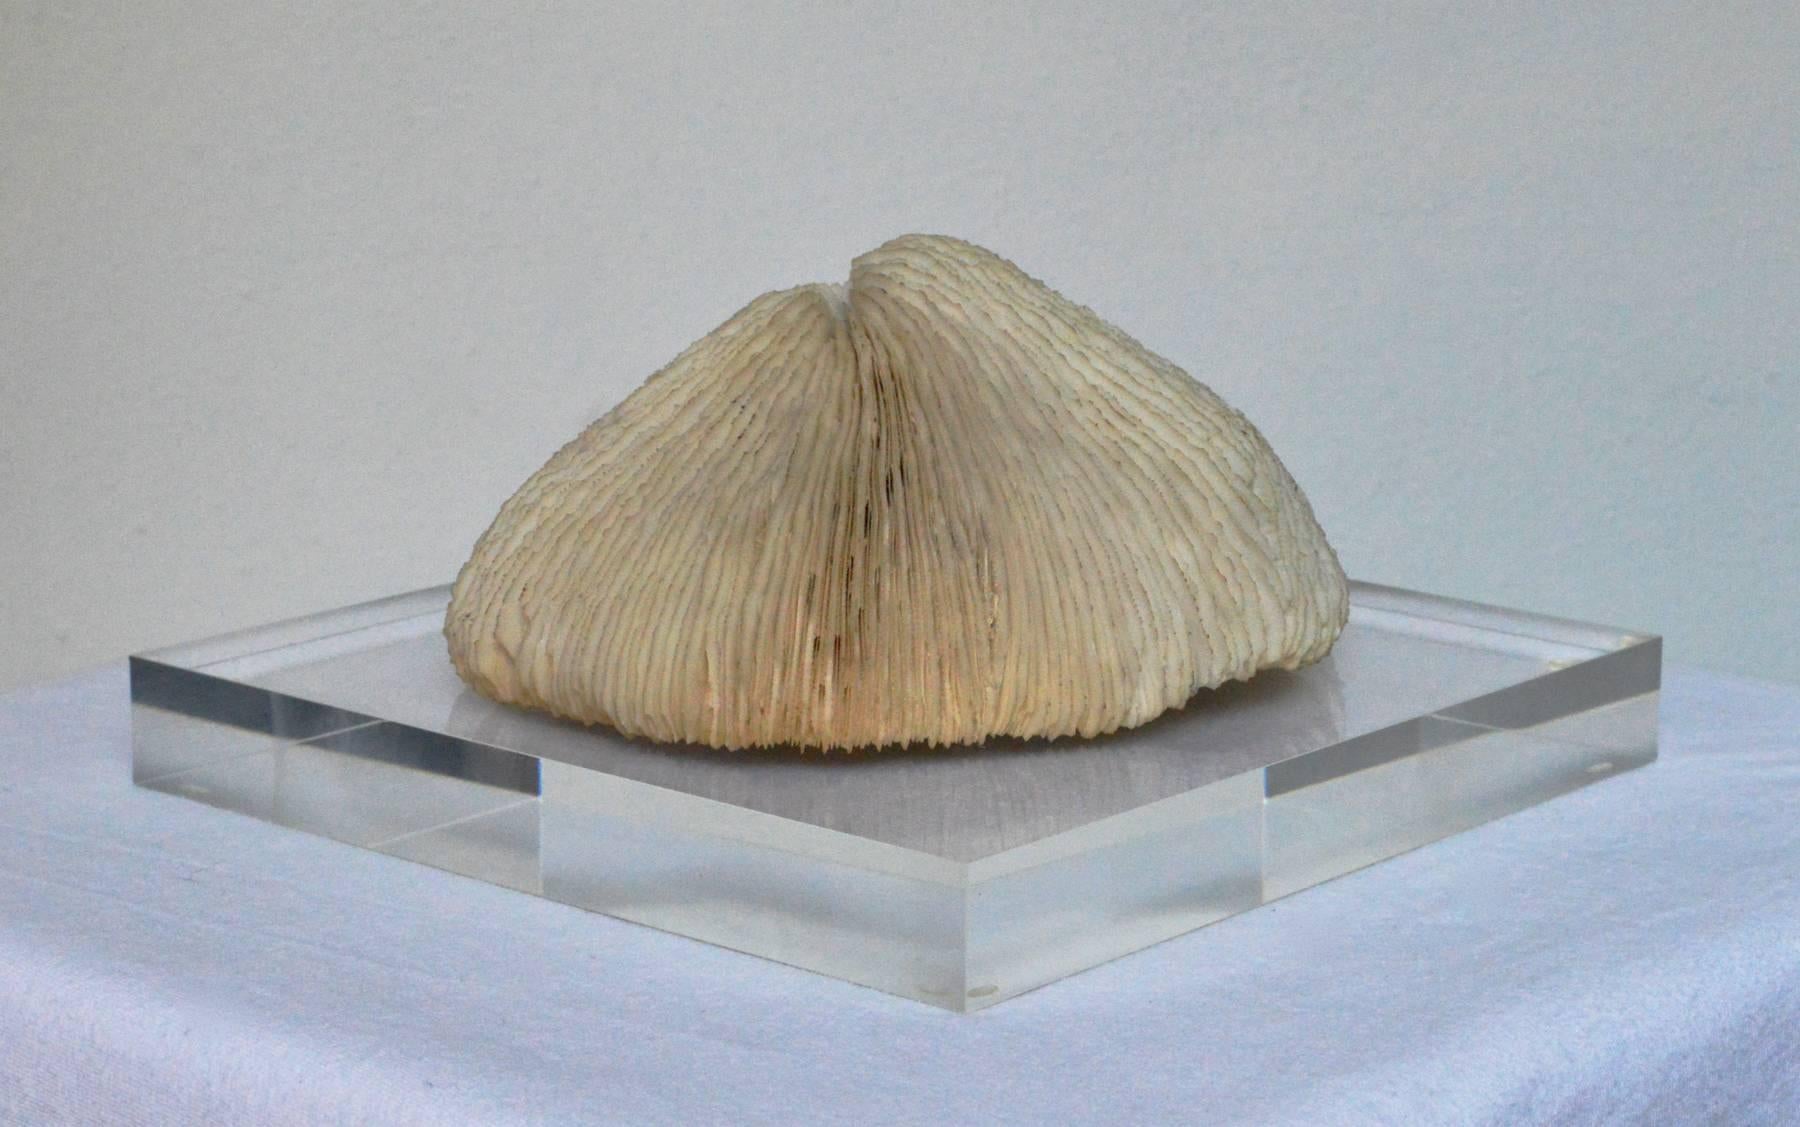 A lovely coral specimen mounted on Lucite riser base.